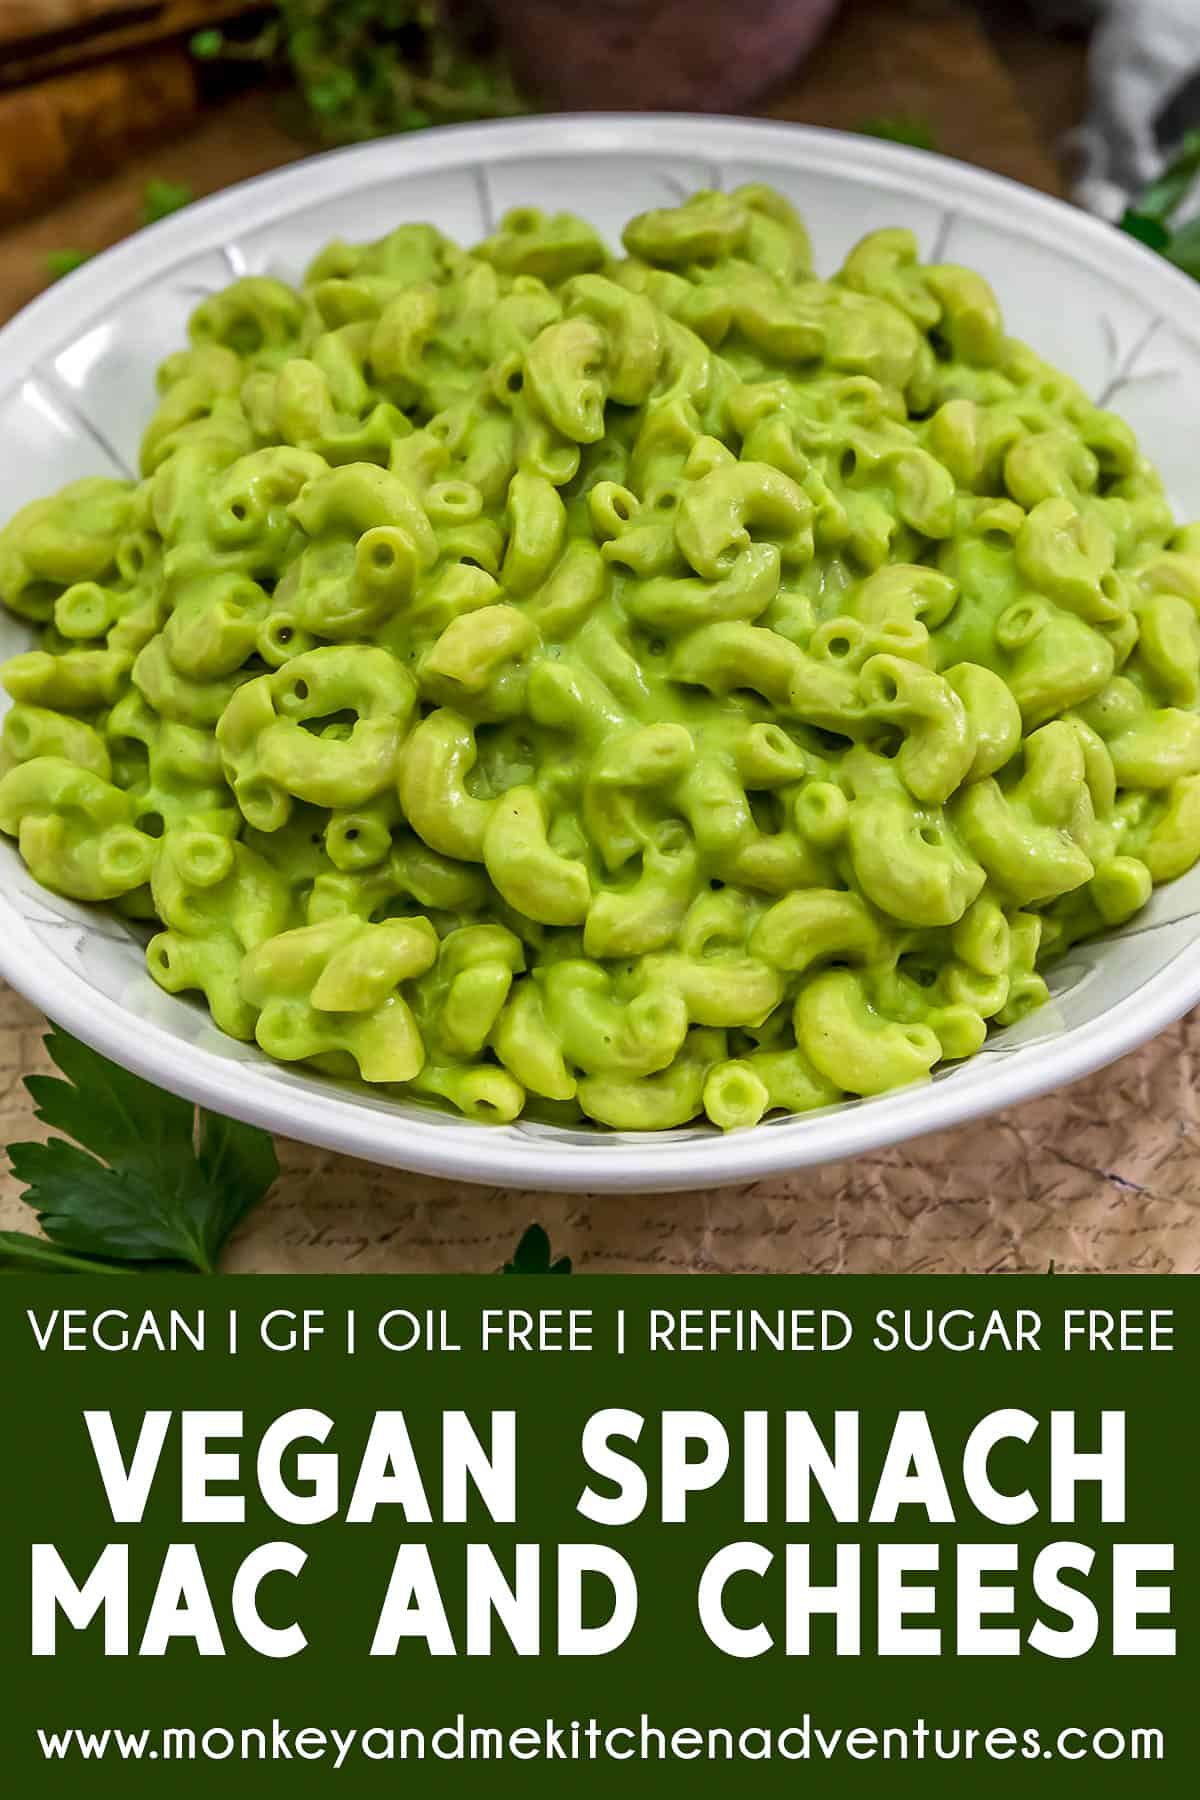 Vegan Spinach Mac and Cheese with text description